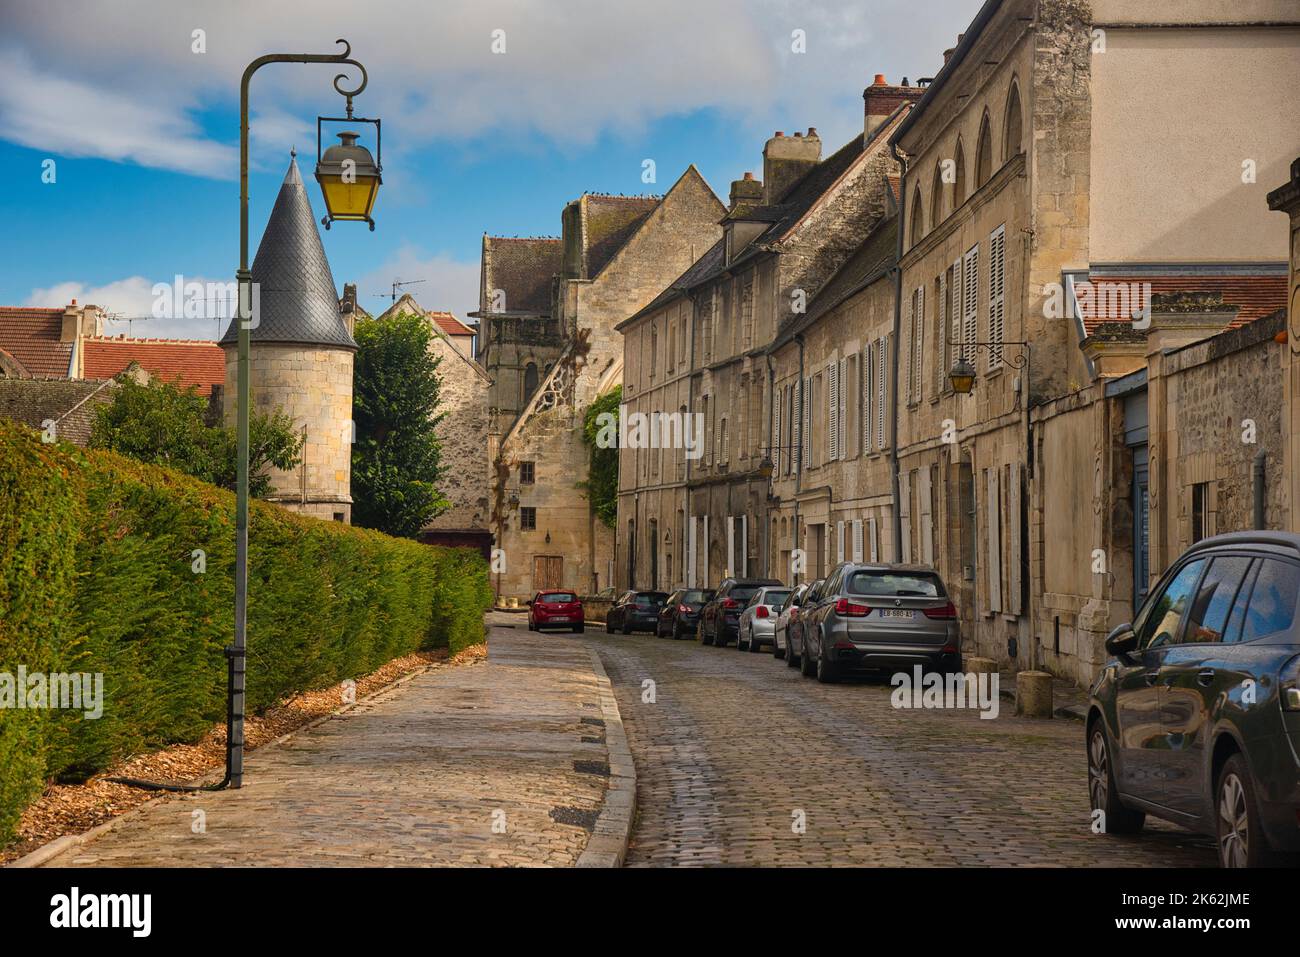 Picturesque city of Senlis in the oise area in france Stock Photo